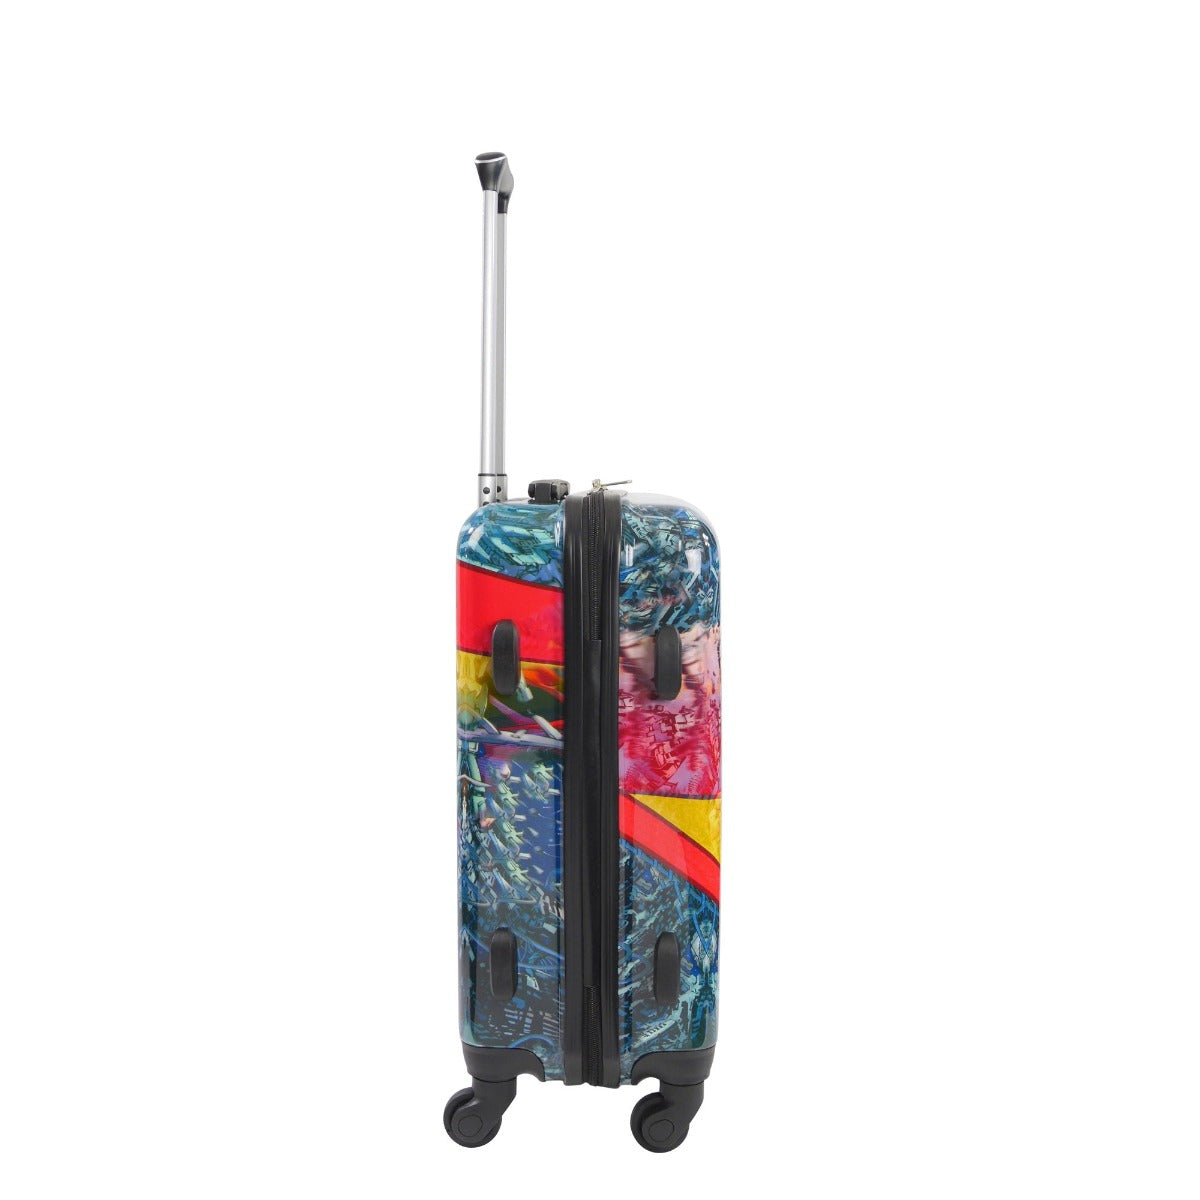 DC Comics Superman 21 inch carry on hardside spinner suitcase luggage - best kids suitcases for travel